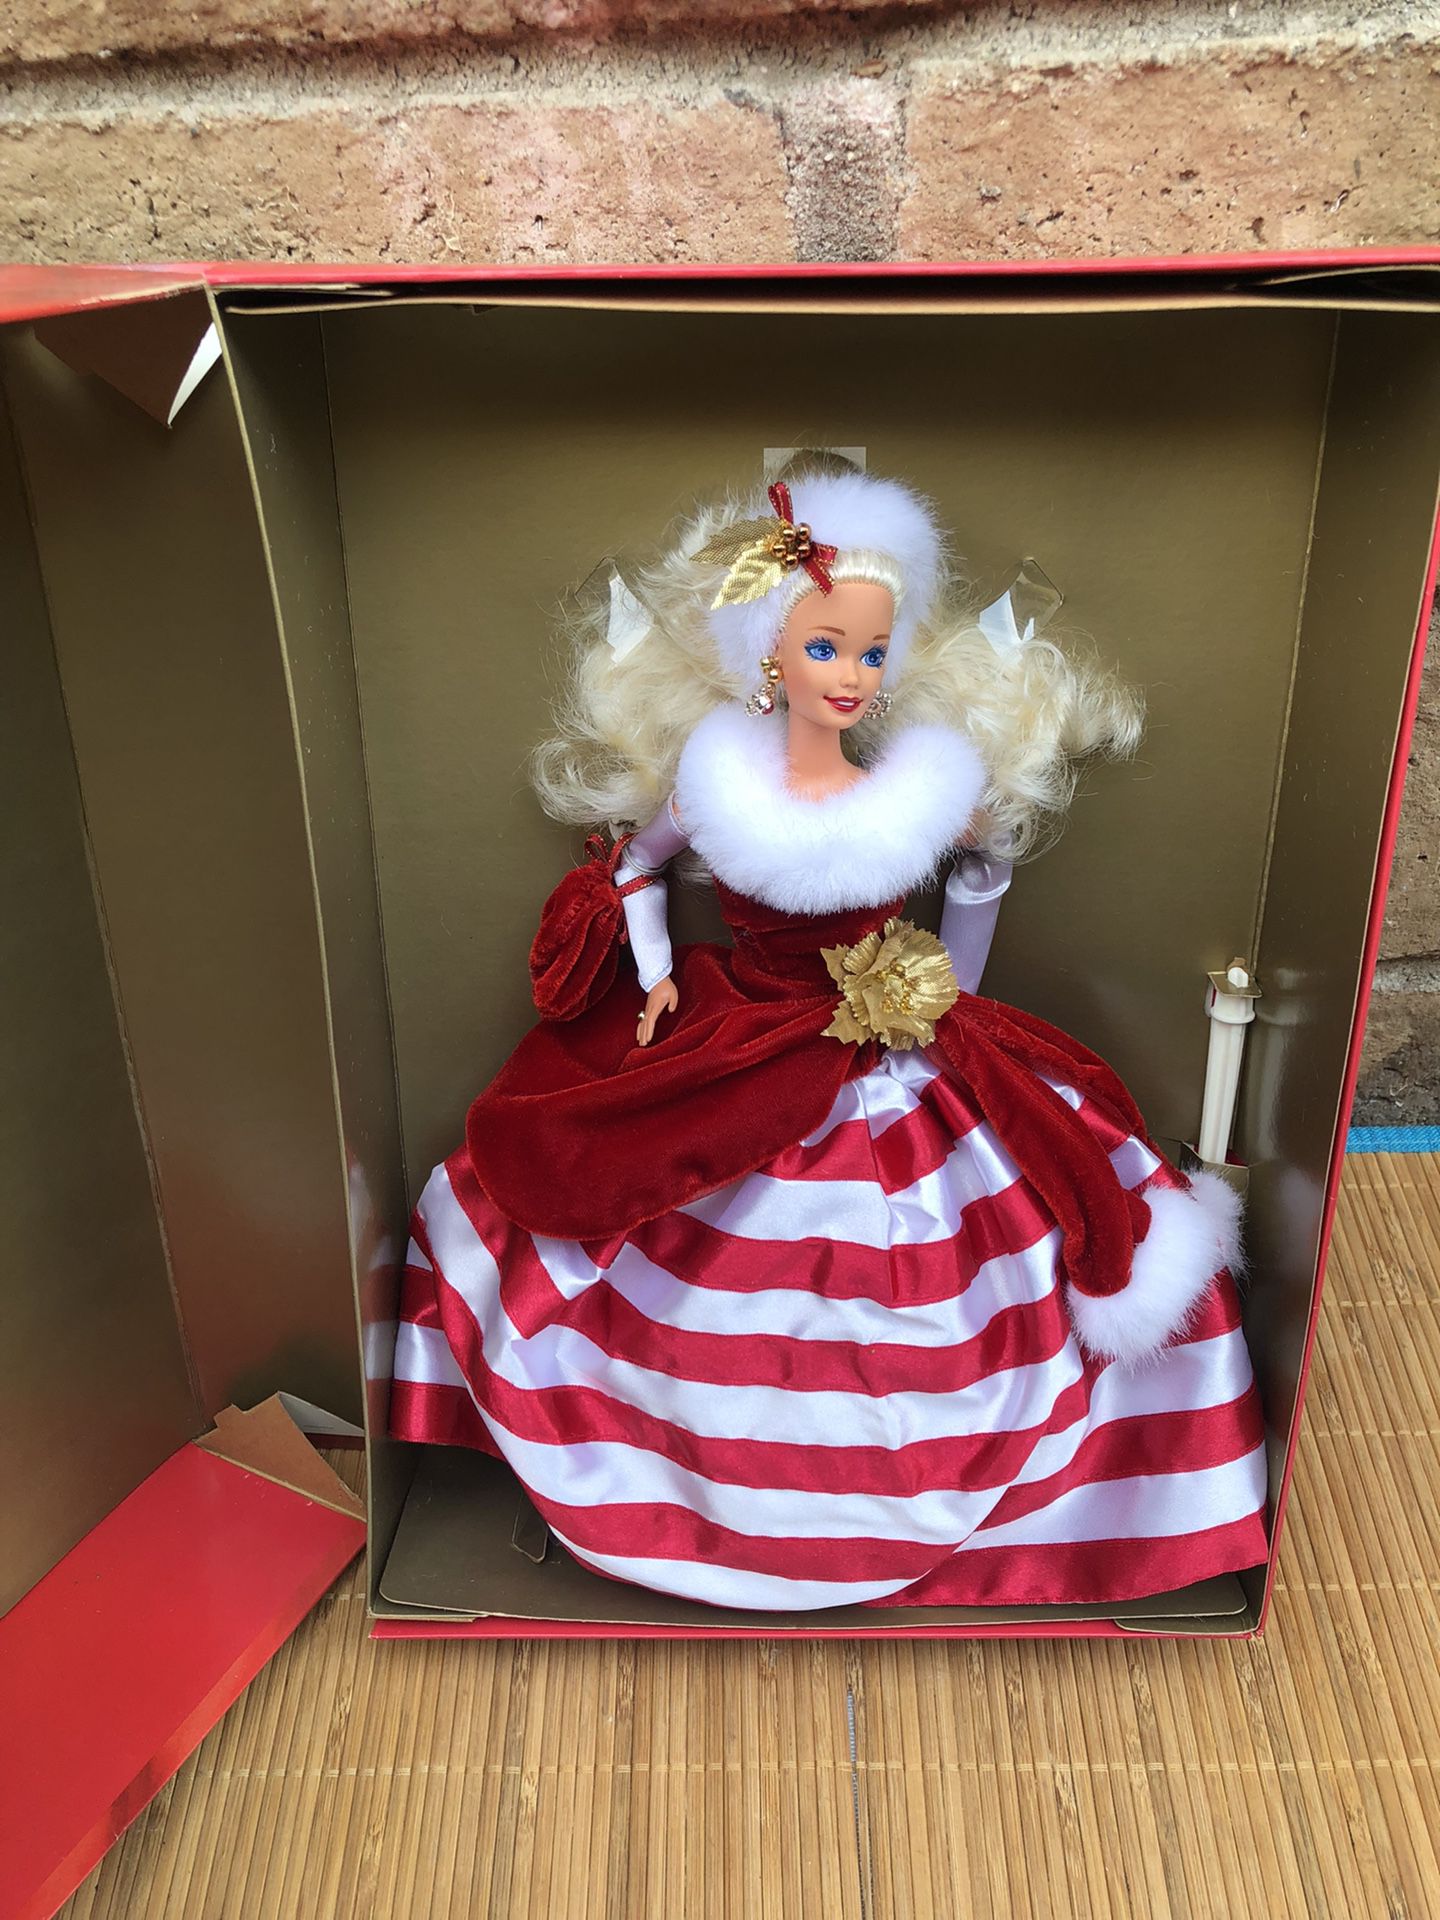 Peppermint Princess Barbie Doll by Mattel 1994 - Winter Princess Collection